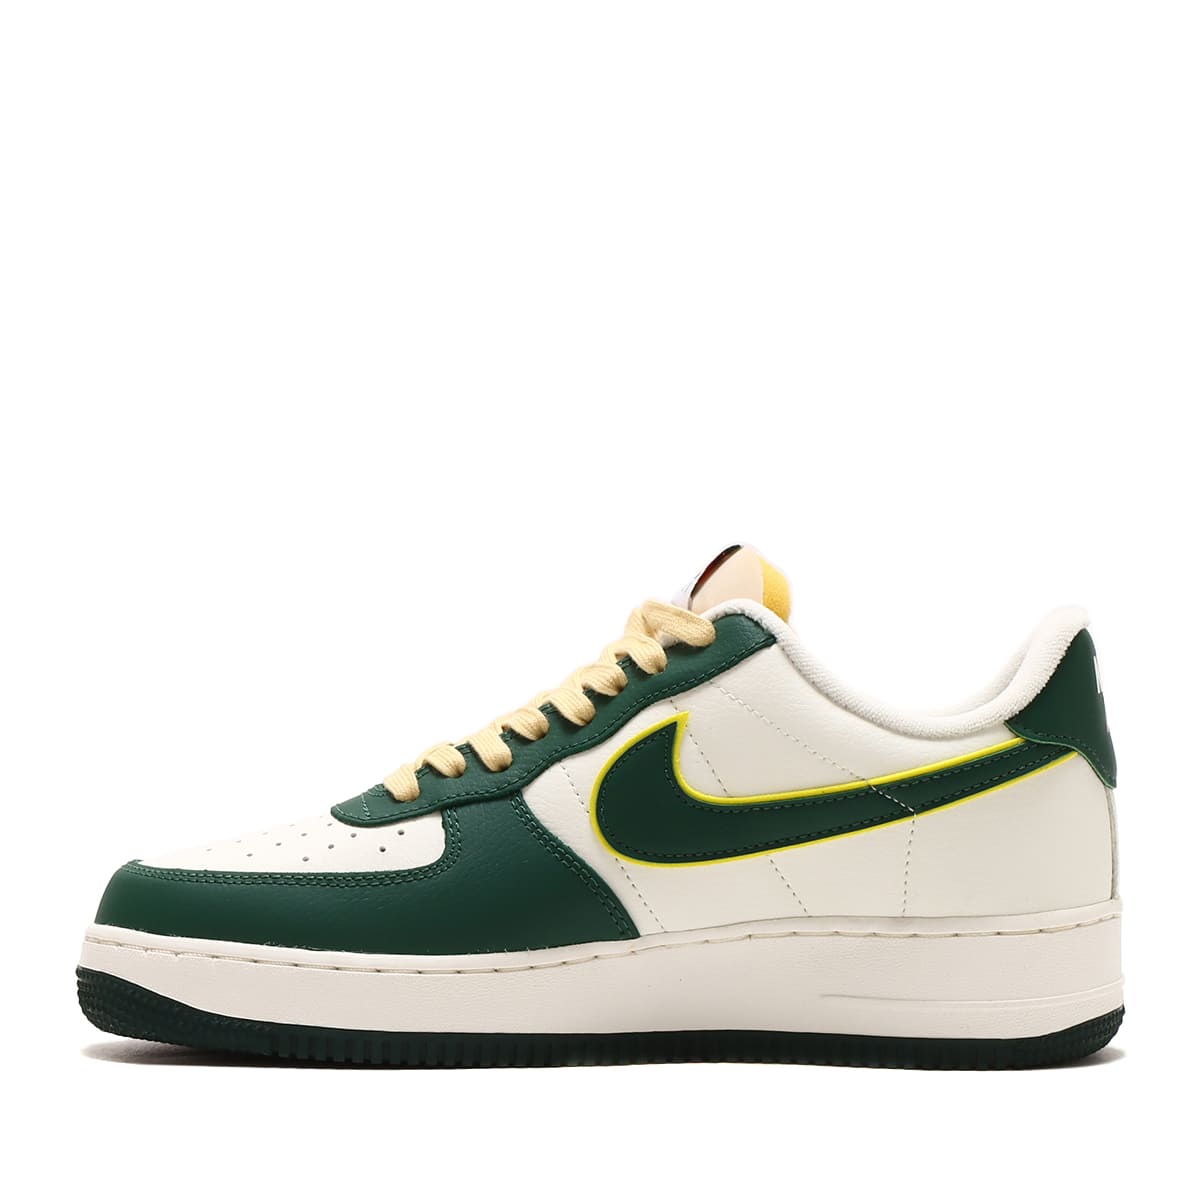 NIKE AIR FORCE 1 '07 LV8 SAIL/NOBLE GREEN-OPTI YELLOW-PICANTE RED ...